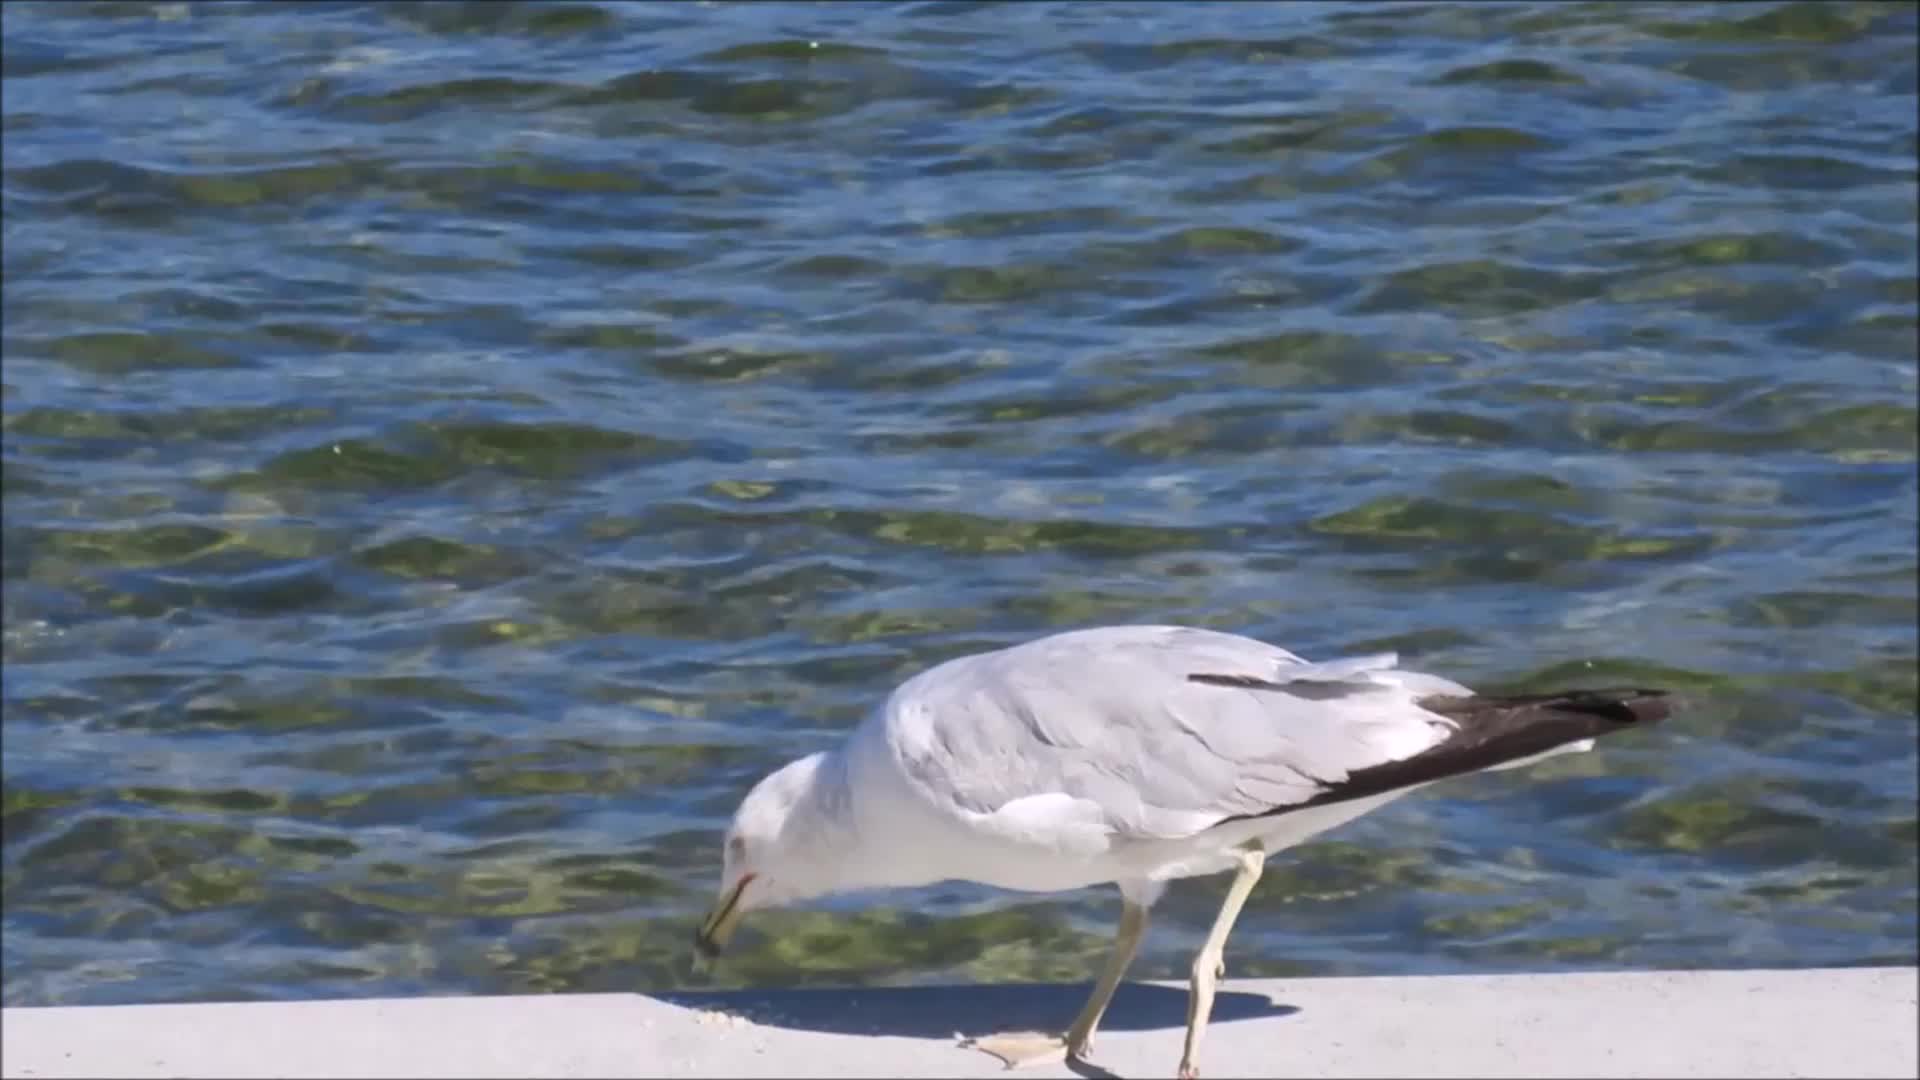 Gull Eating by Lake - Animals - Videotime.com